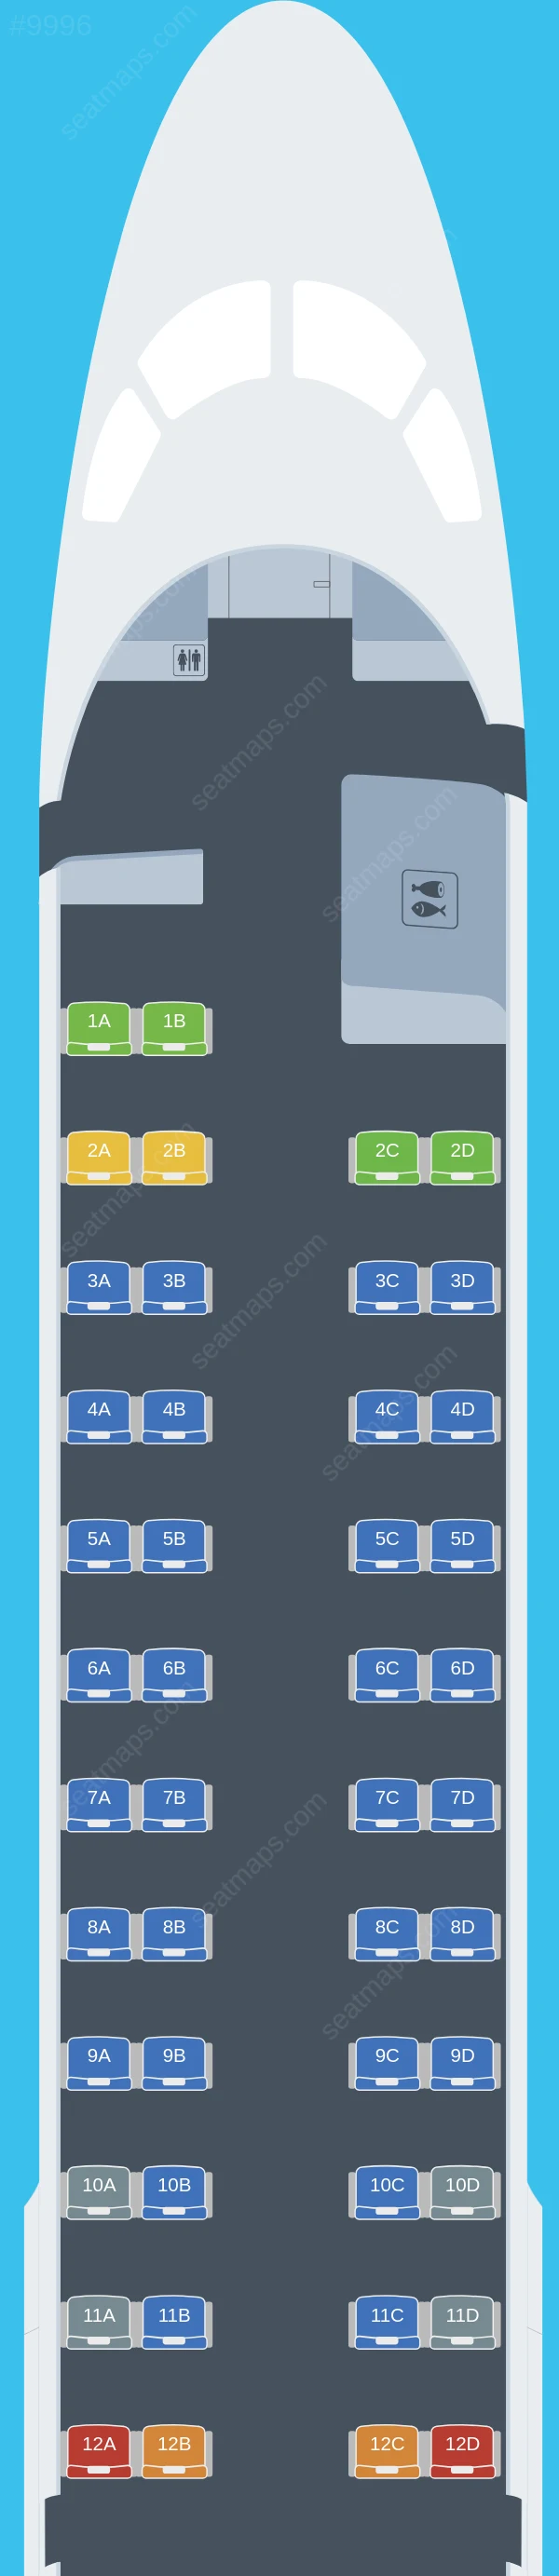 Eastern Airways Embraer E190 seatmap preview